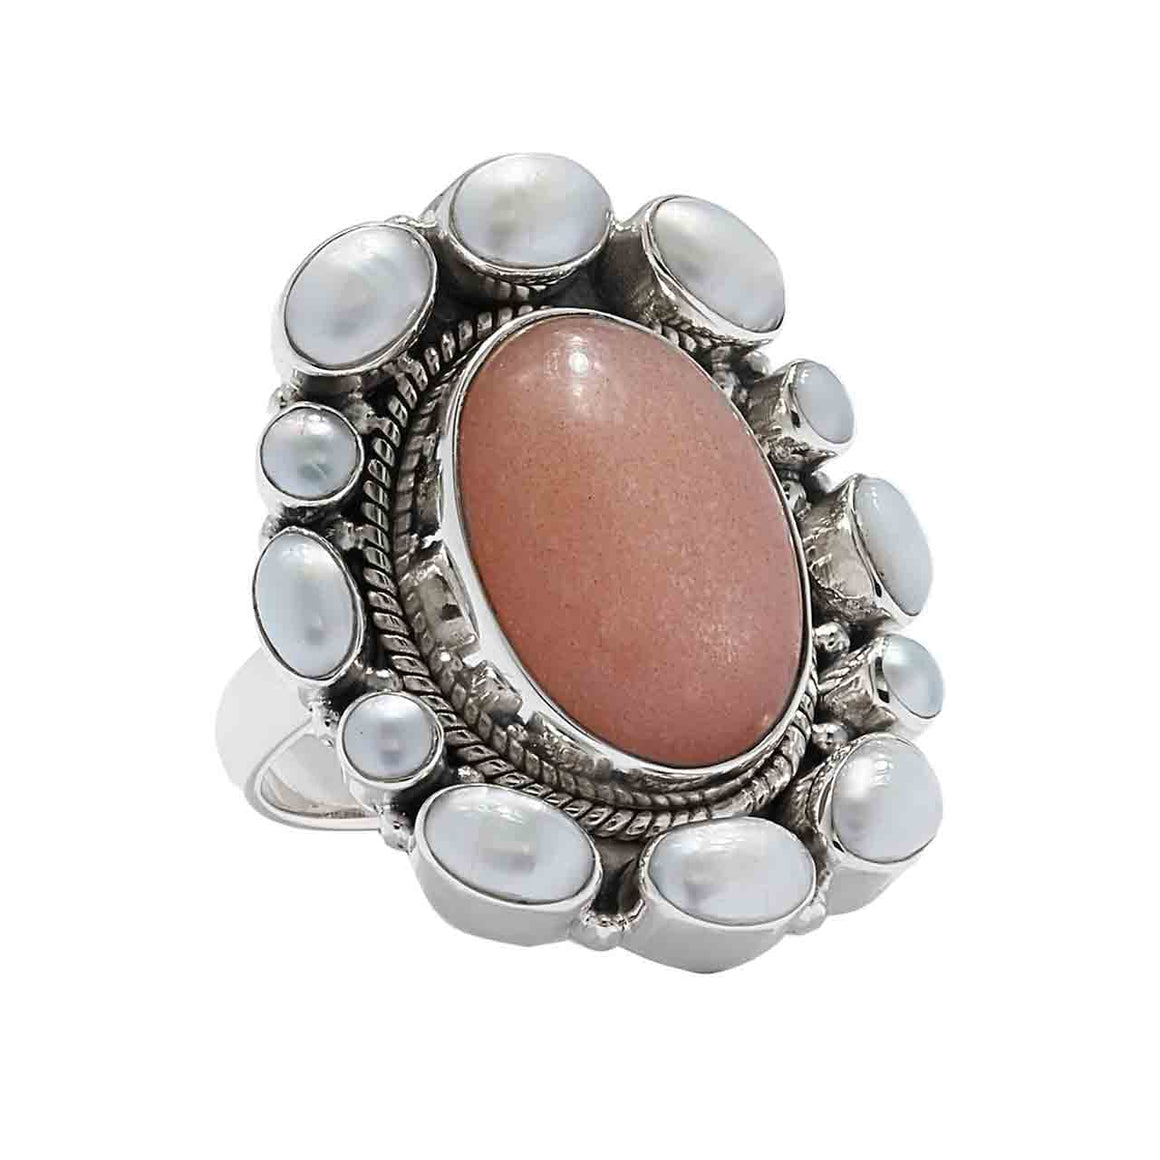 Peach Moonstone and White Pearl Ring